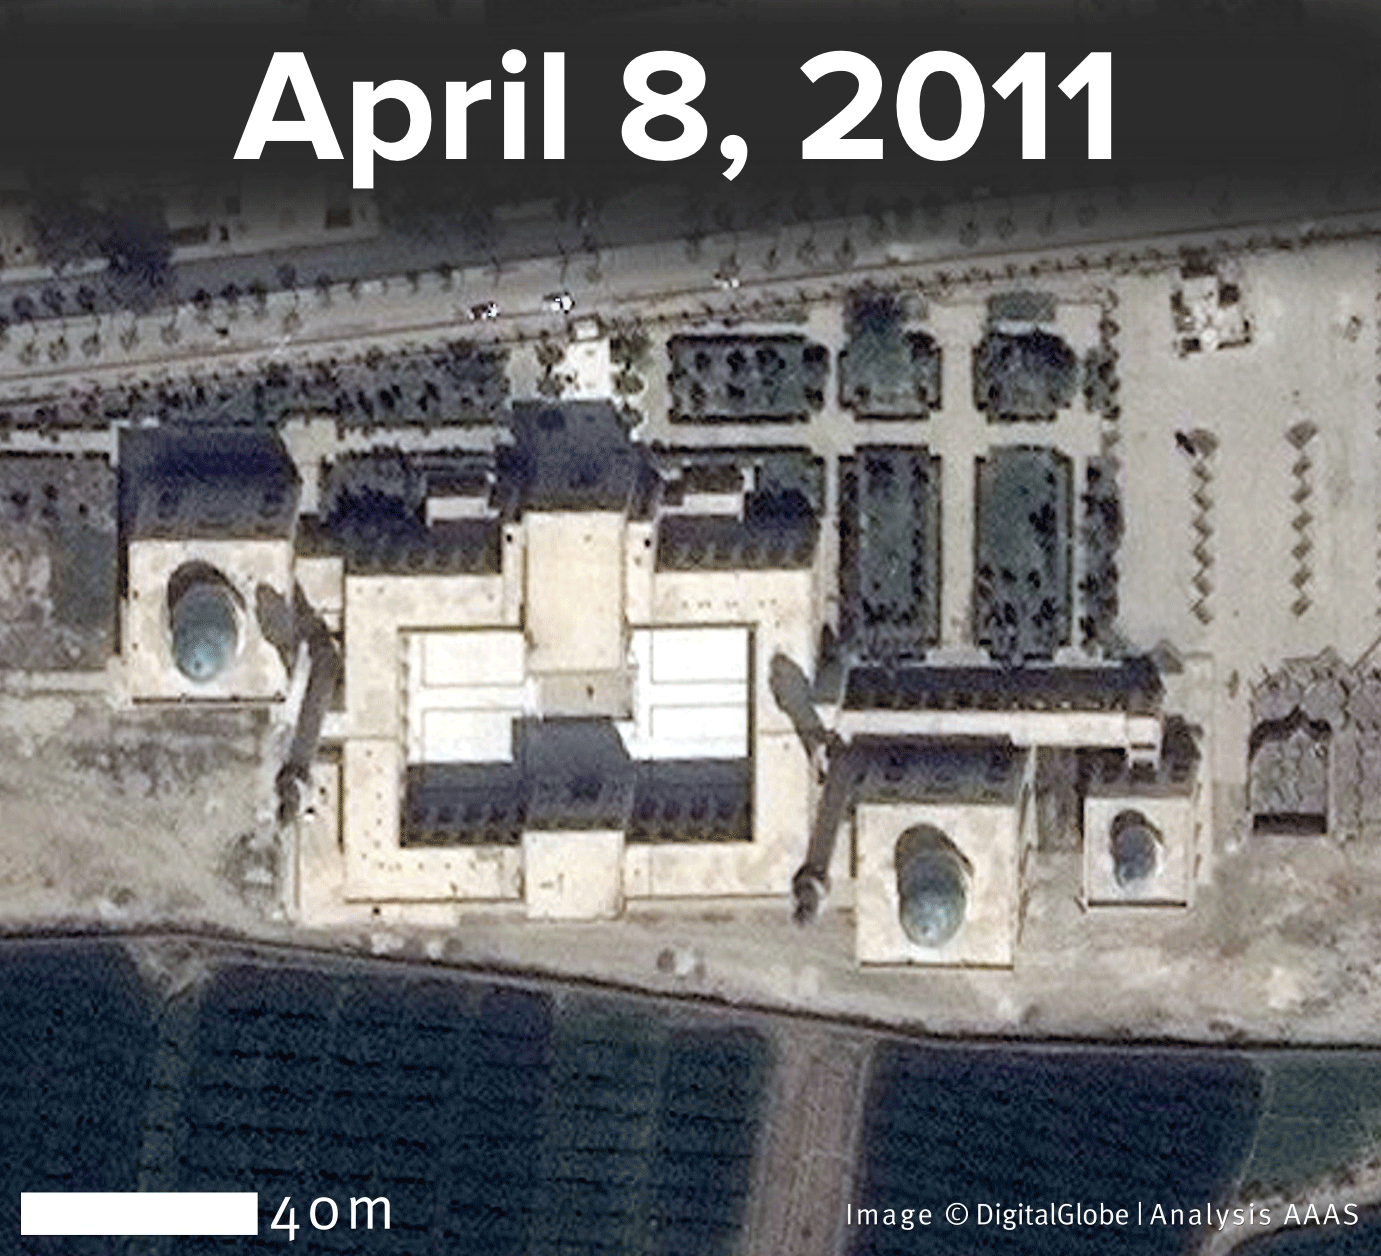 Satellite imagery reveals the ISIS-led destruction of the tombs of Uwais al-Qarani, Obay ibn Qays, and Ammar ibn Yasir in Raqqa. Credit: DigitalGlobe | U.S. Department of State, NextView License | Analysis AAAS.